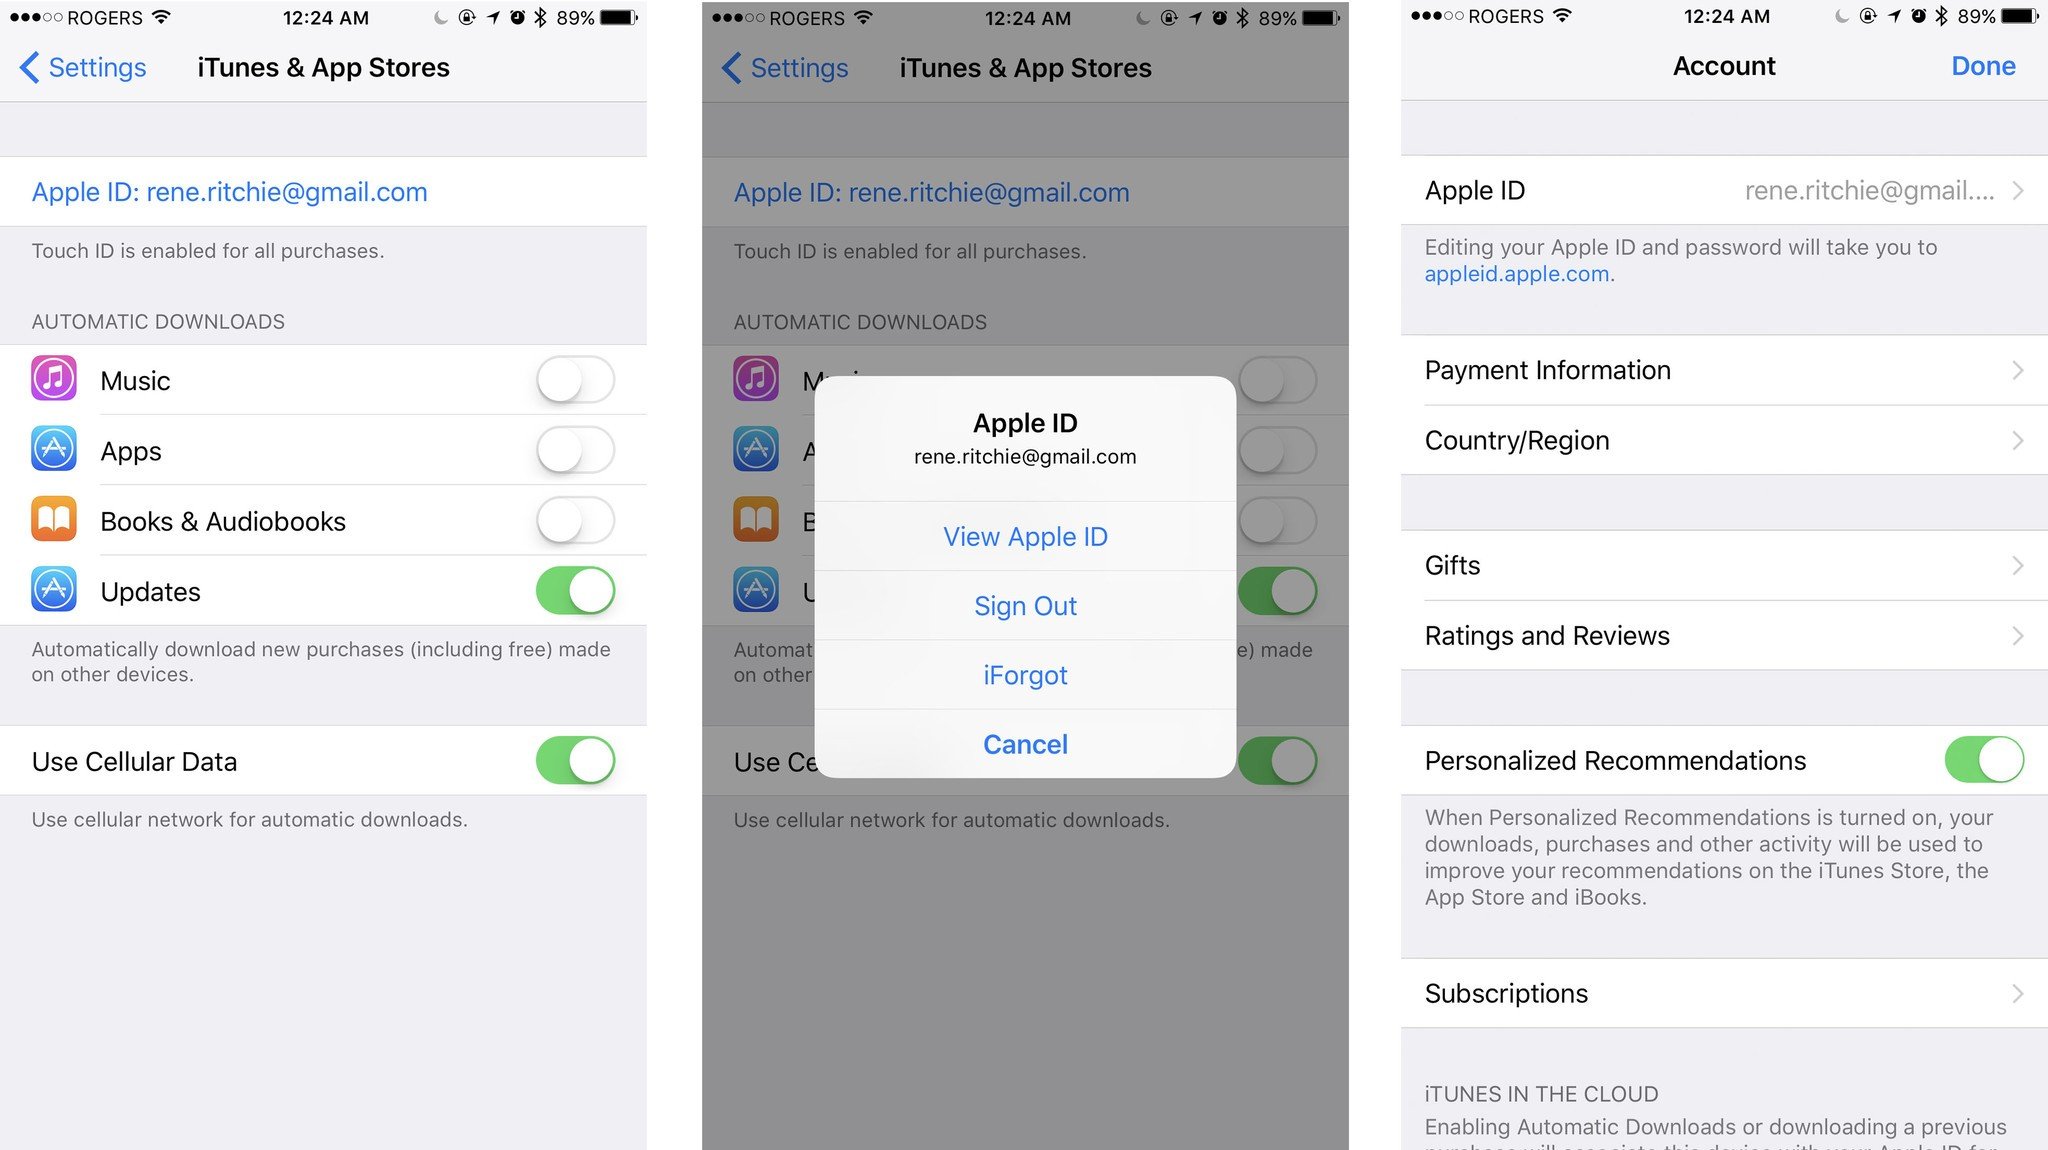 How to change countries in the iTunes and App Store for iPhone or iPad